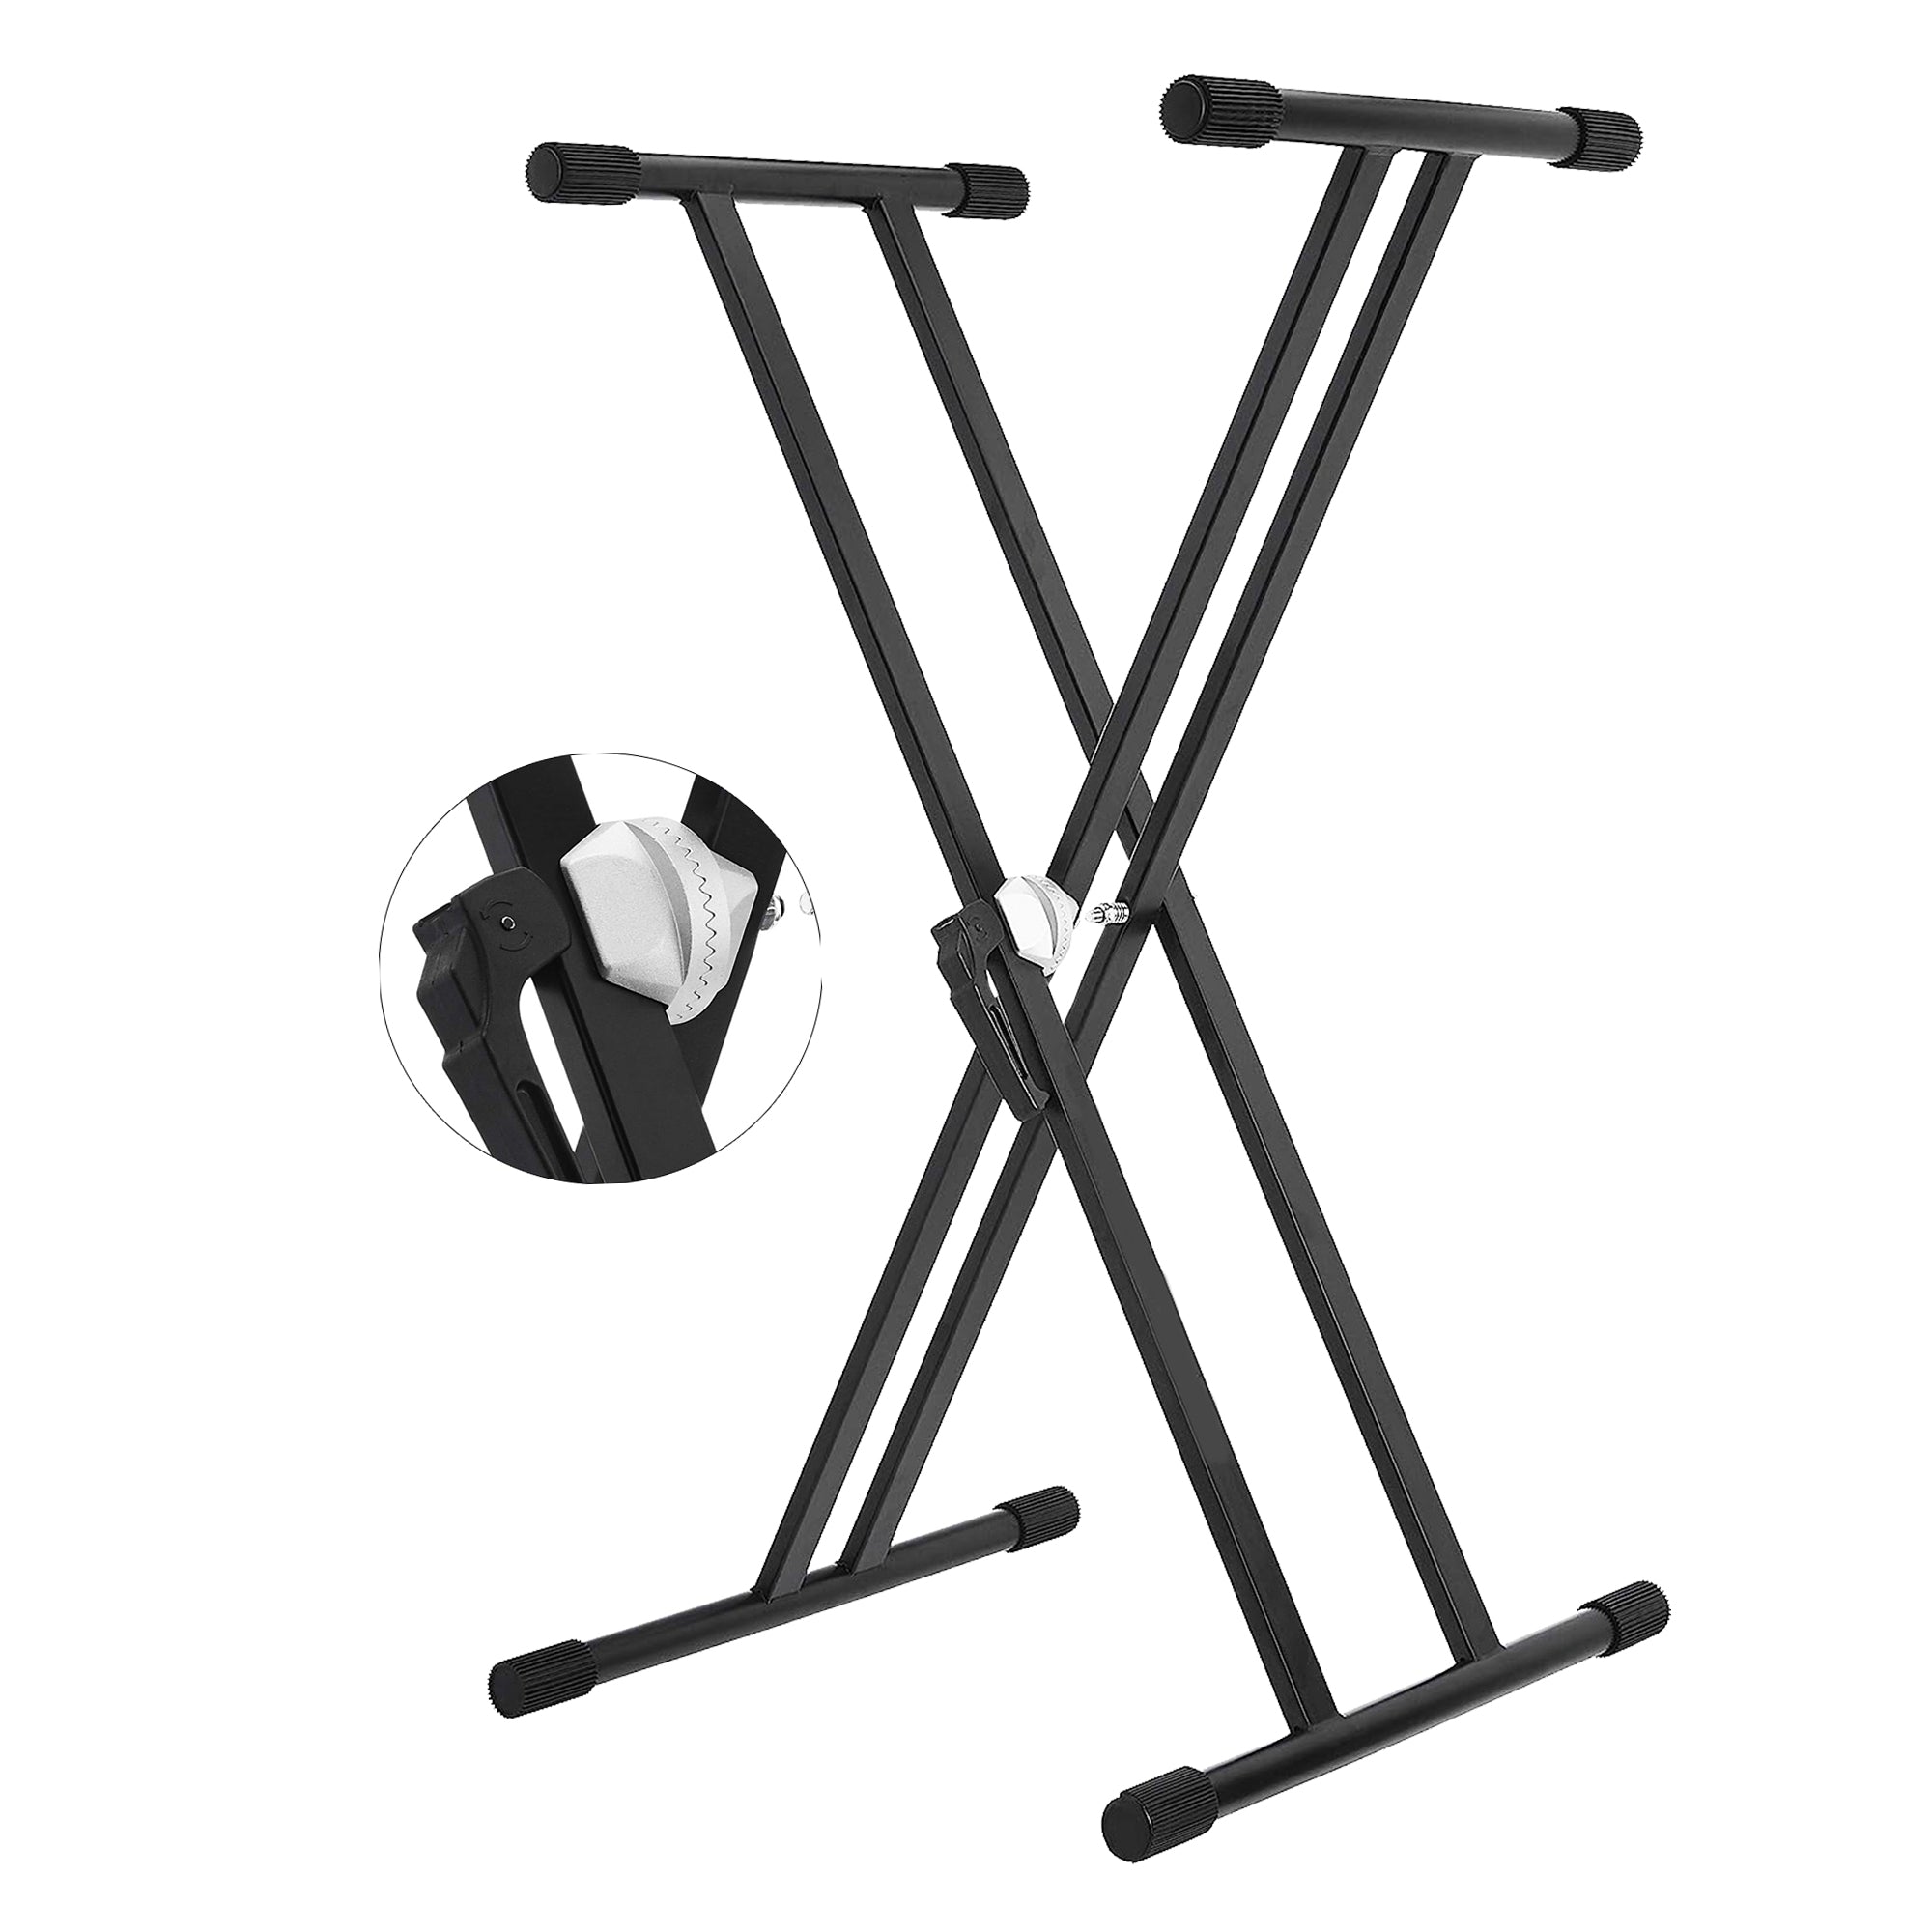 5 Core Adjustable Keyboard Stand Riser • X Style Heavy-Duty Double Braced Digital Piano Stands